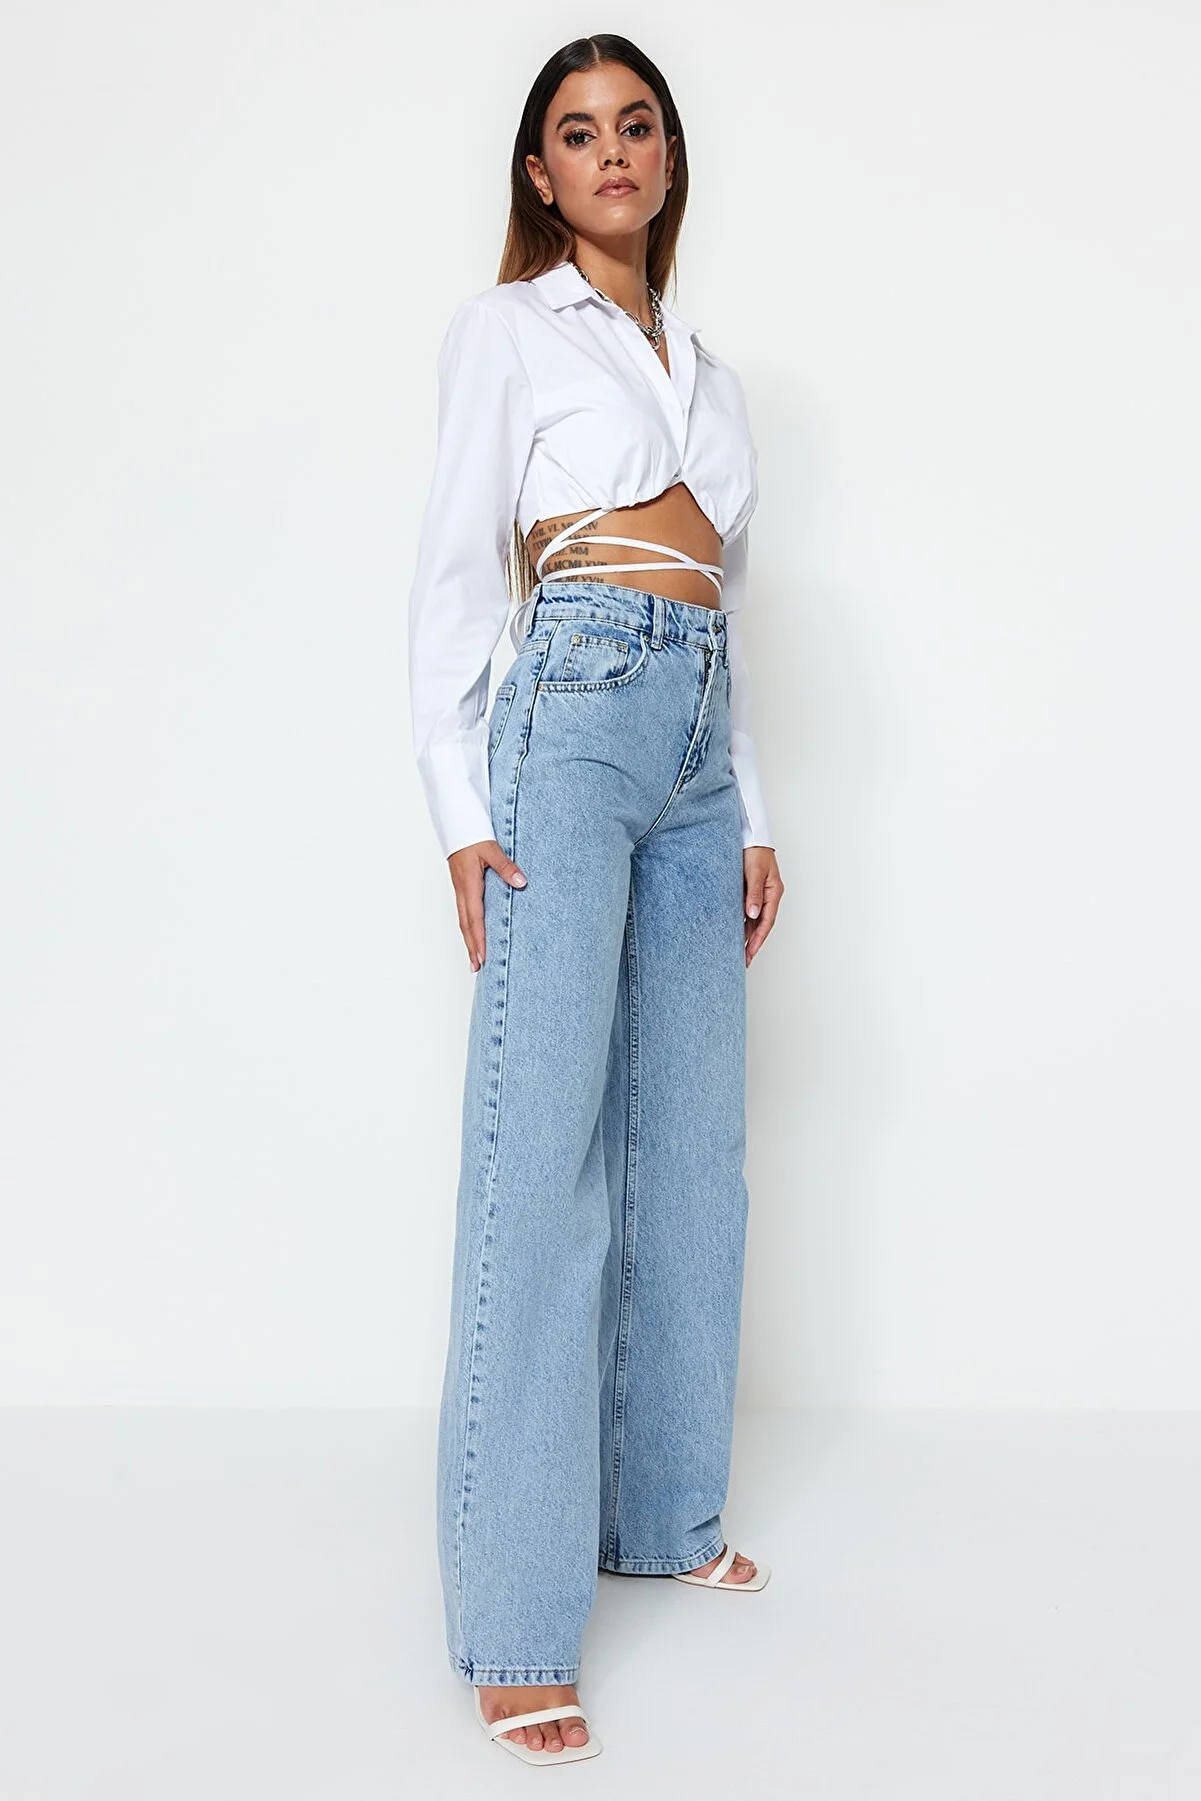 Trendyol Collection Jean – Gray – Wide leg - Impression